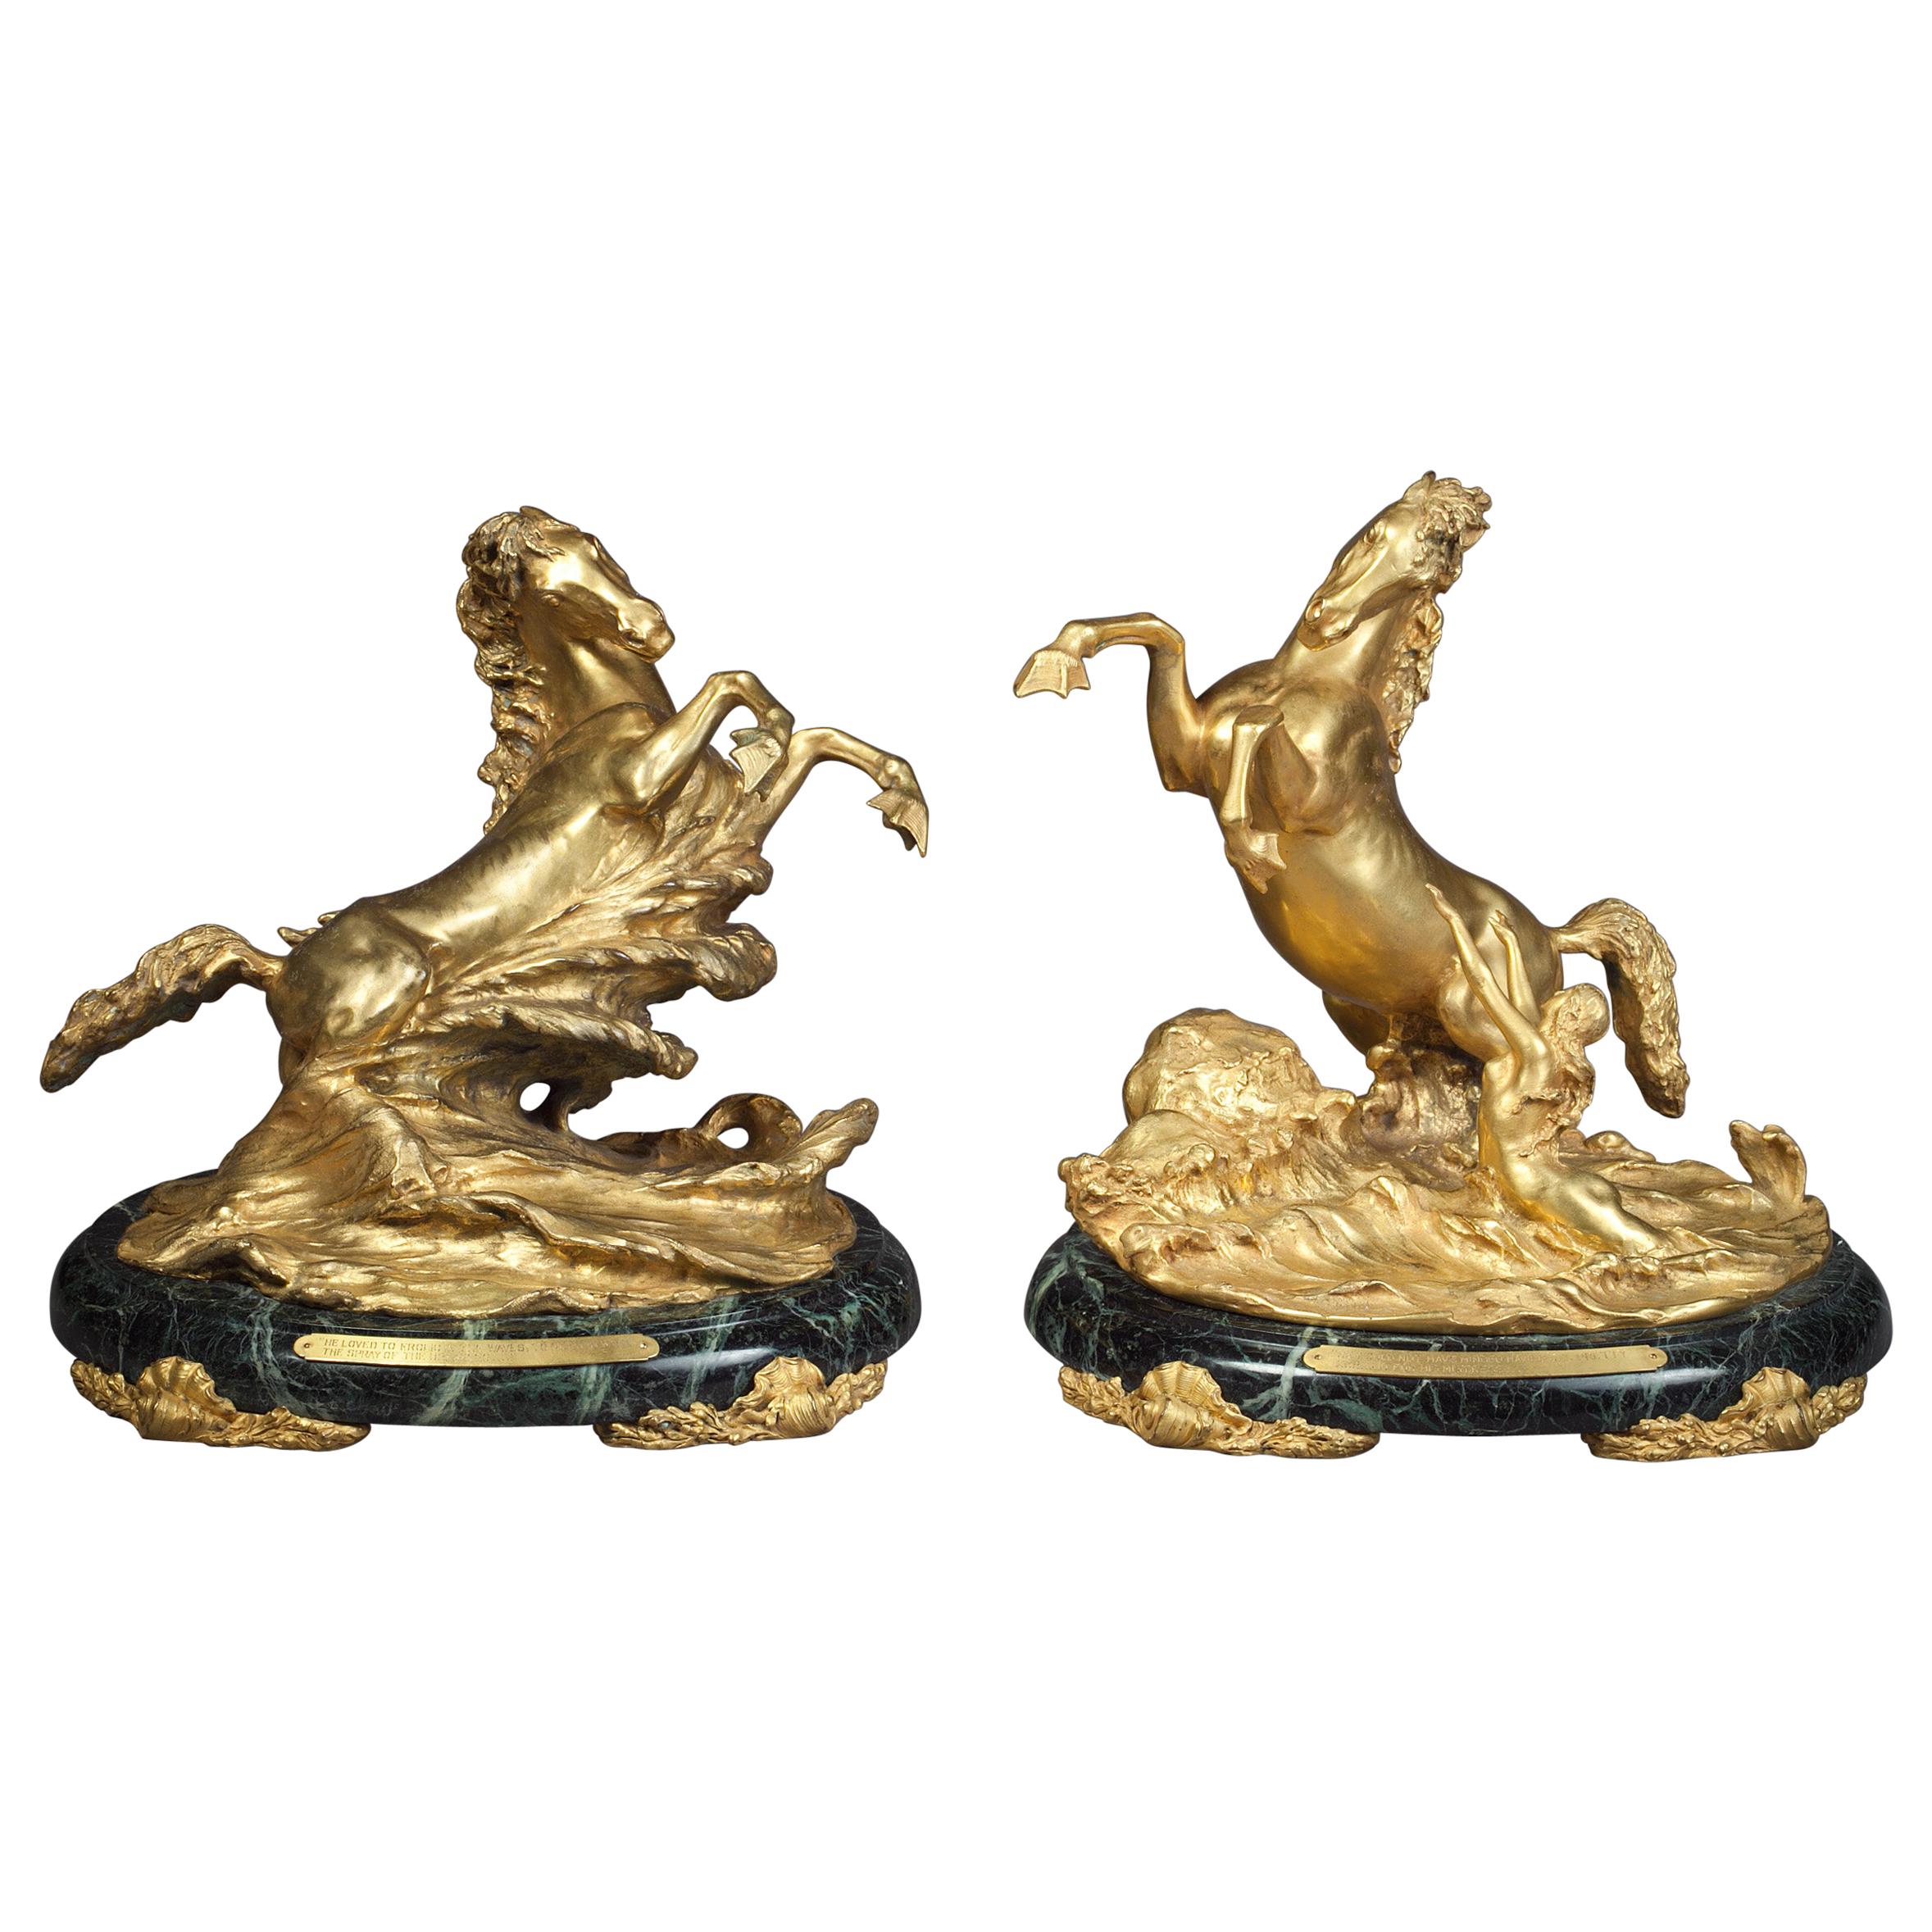 Pair of Gilt Bronze Table Sea Horses on Marble, by E.F. Caldwell, circa 1900